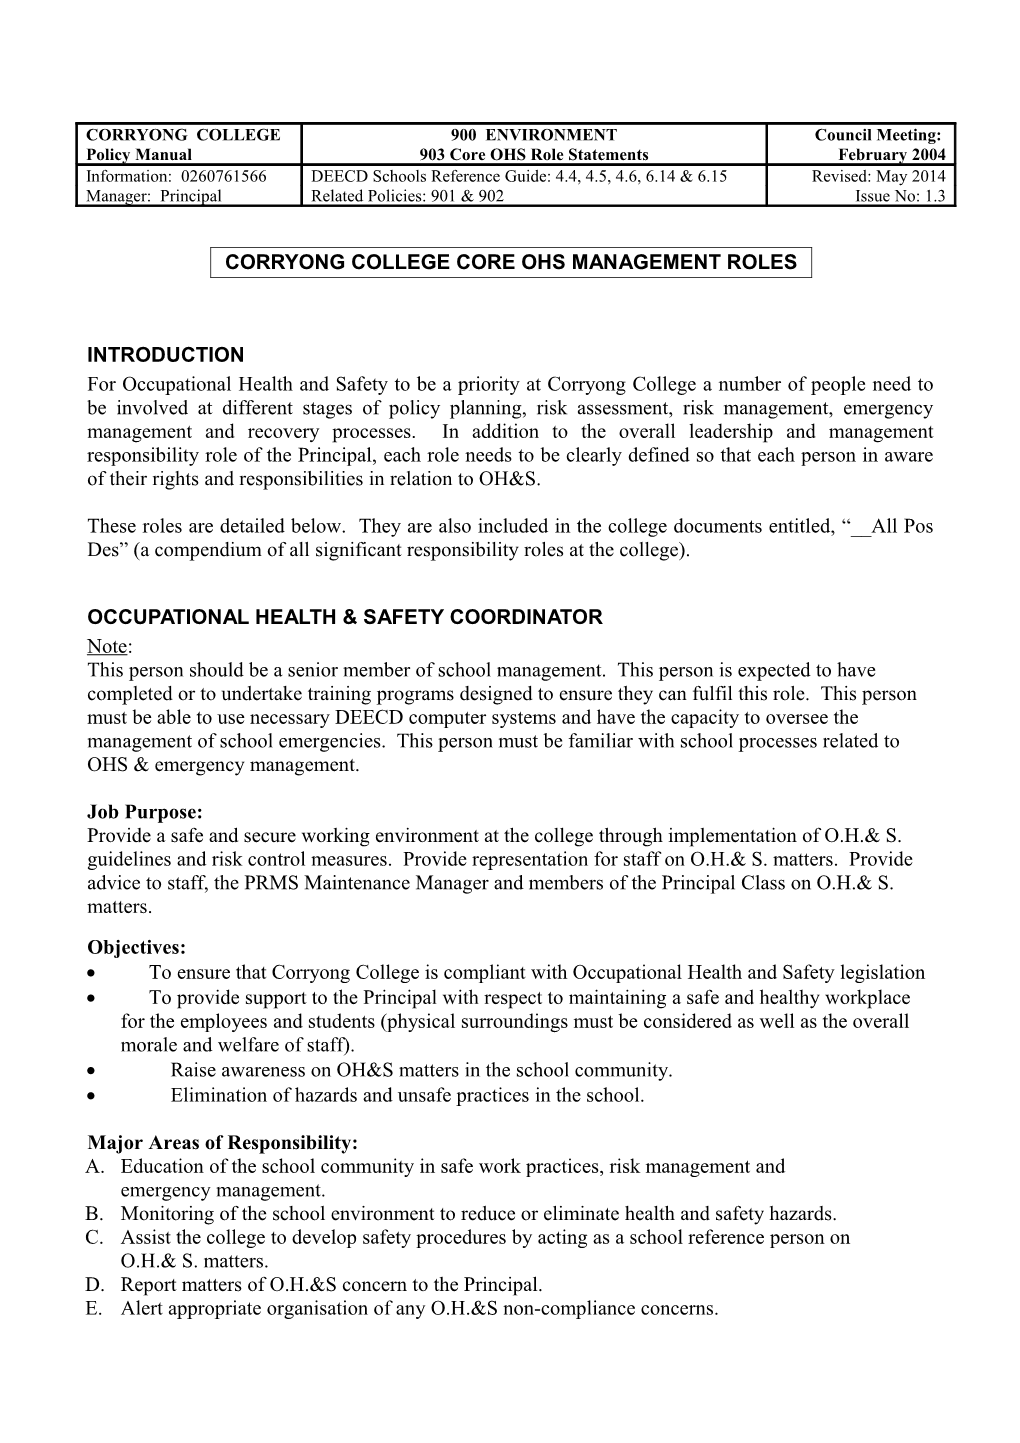 Corryongcollegecore Ohs Management Roles